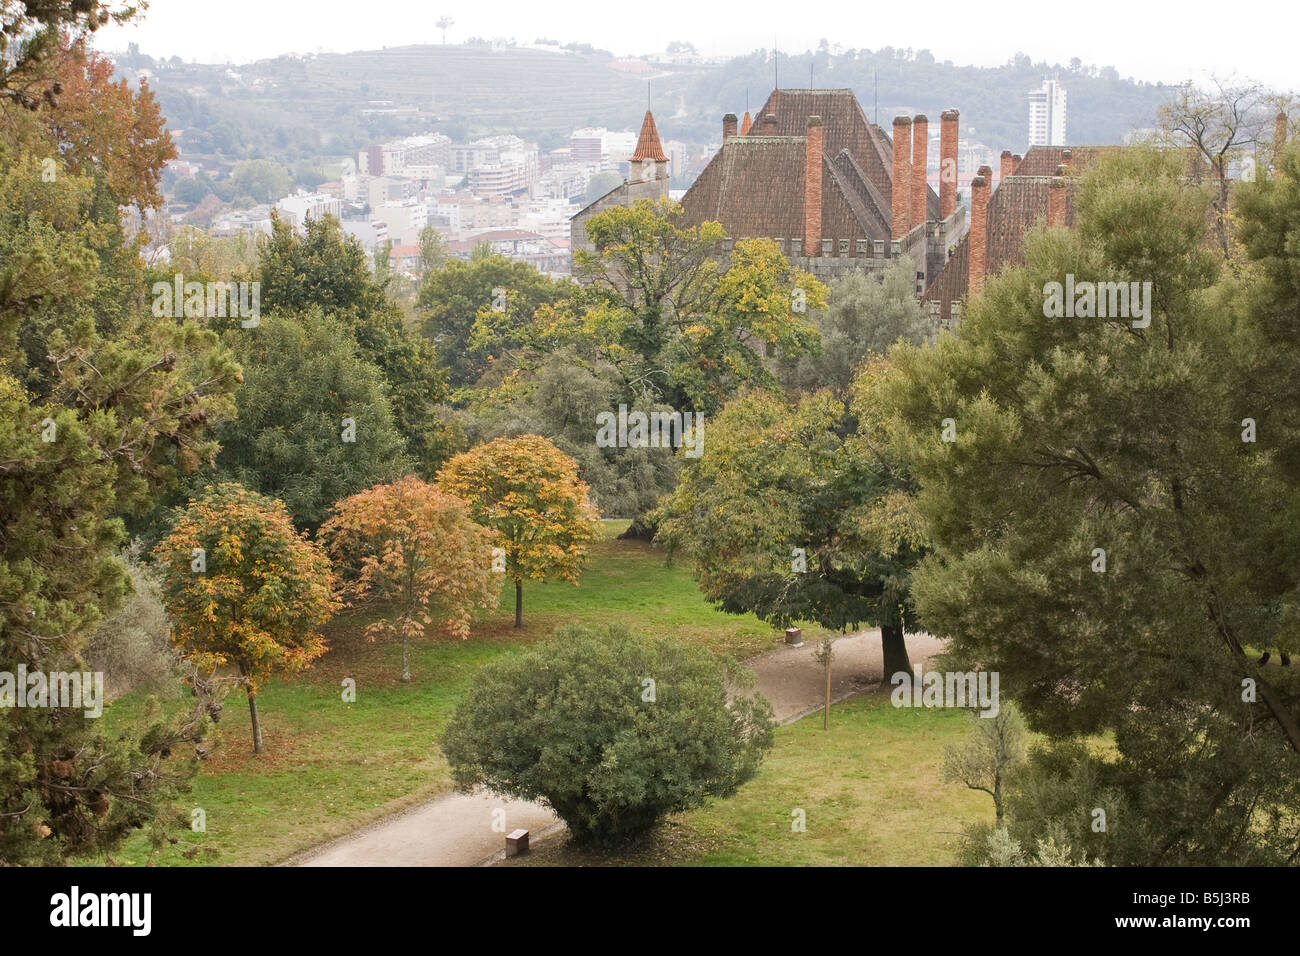 Palace of the Duques of Bragança, seen from the Guimaraes Castle walls. Stock Photo